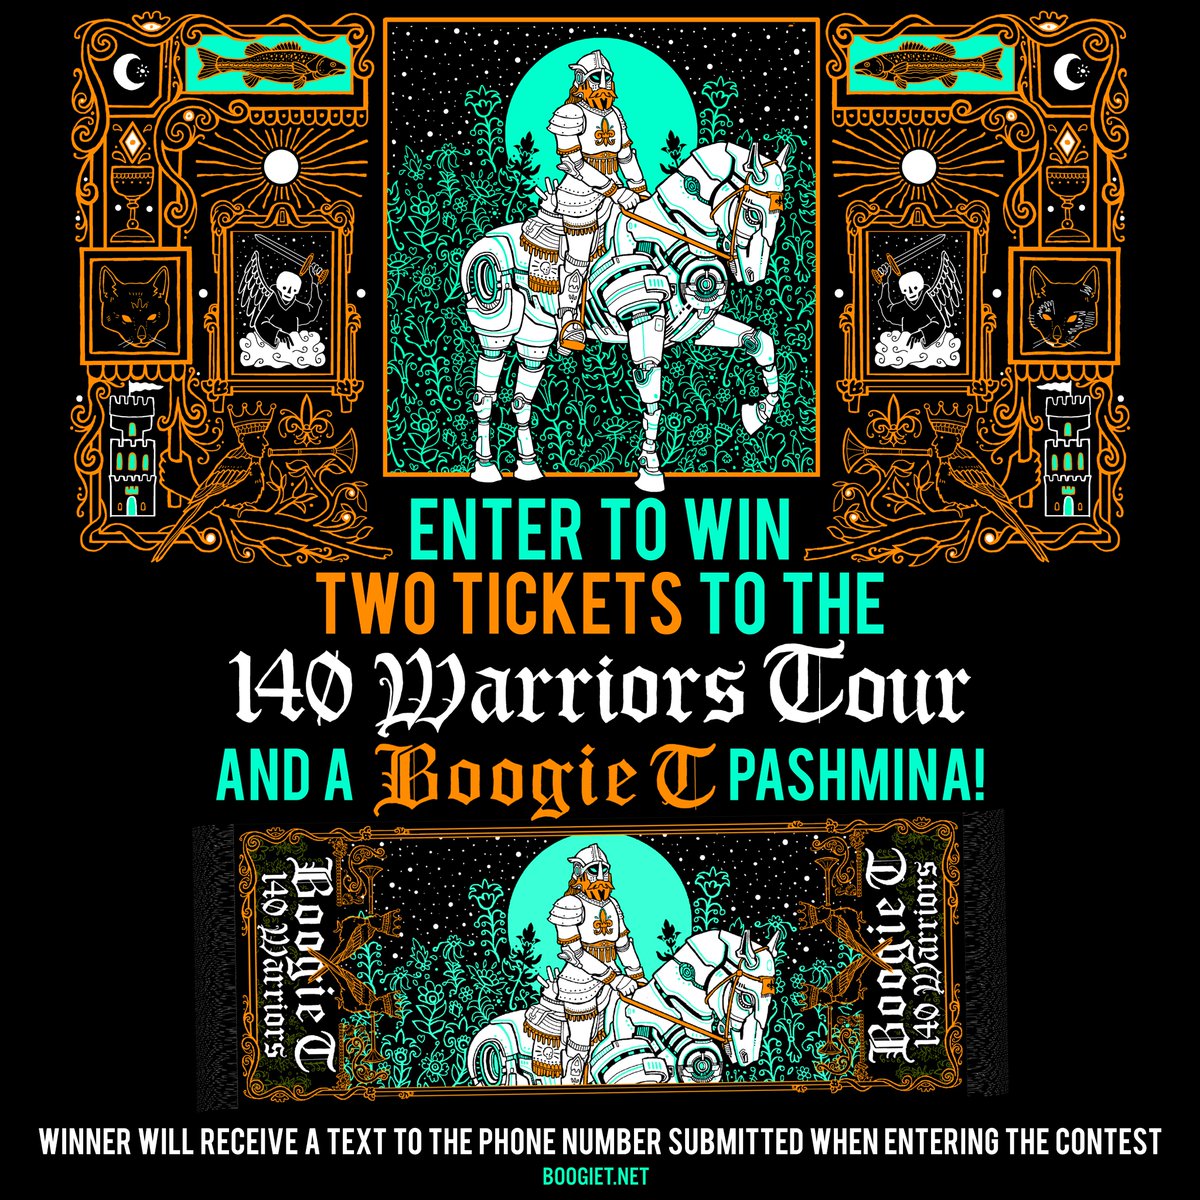 GIVEAWAY! Enter to win a pair of tickets to the @boogietmusic Chicago show at @sound_bar on May 17th & a 140 Warriors pashmina 🎁 Enter here → app.hive.co/l/3veofn